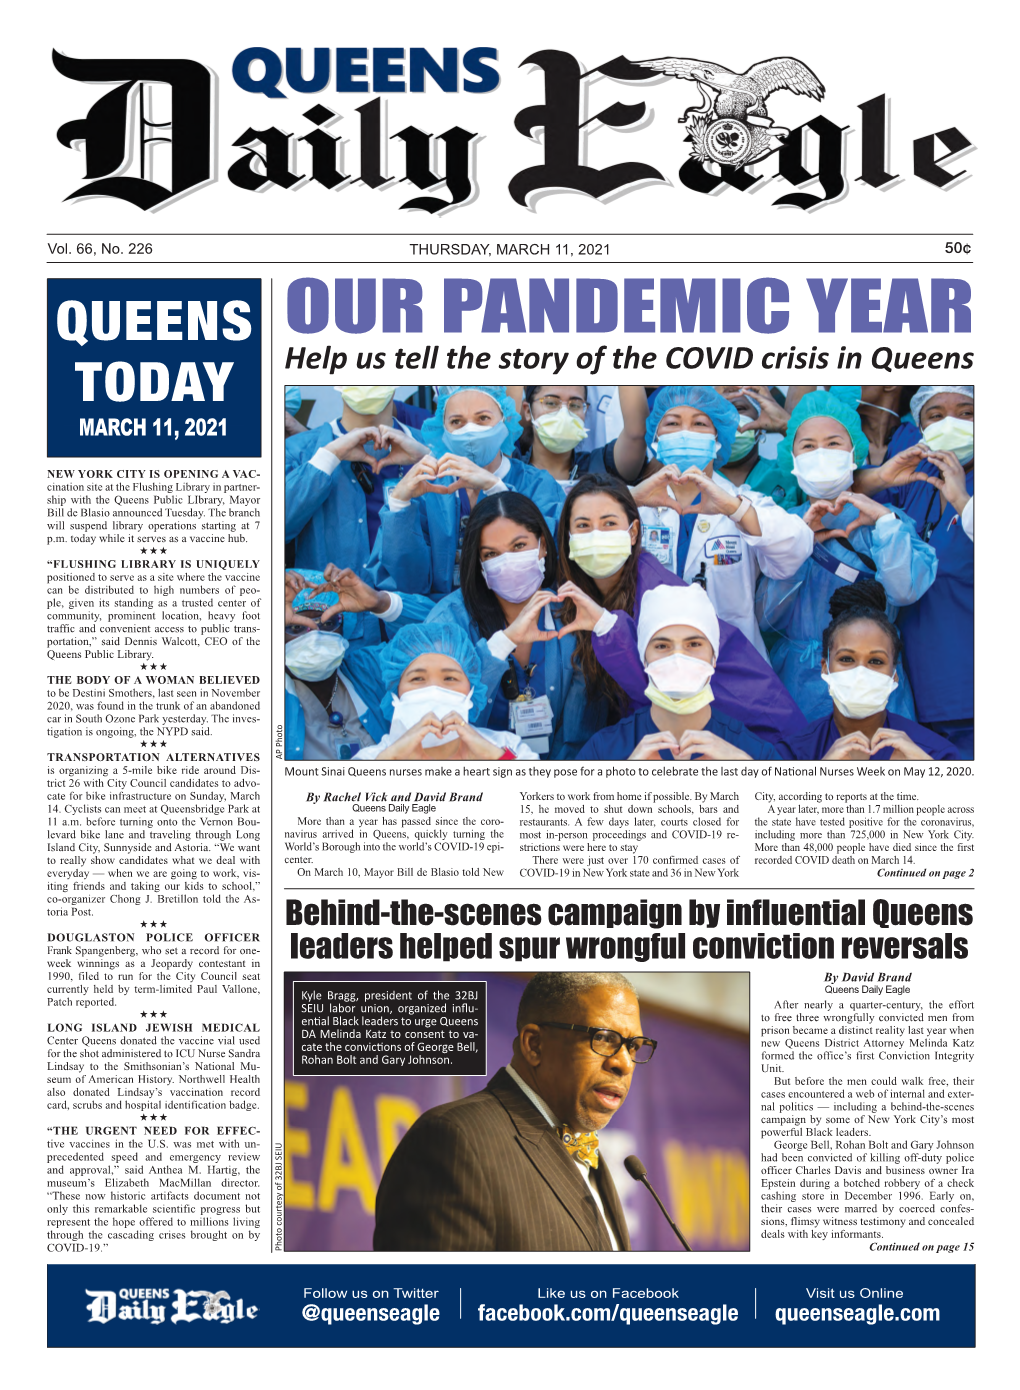 Our Pandemic Year